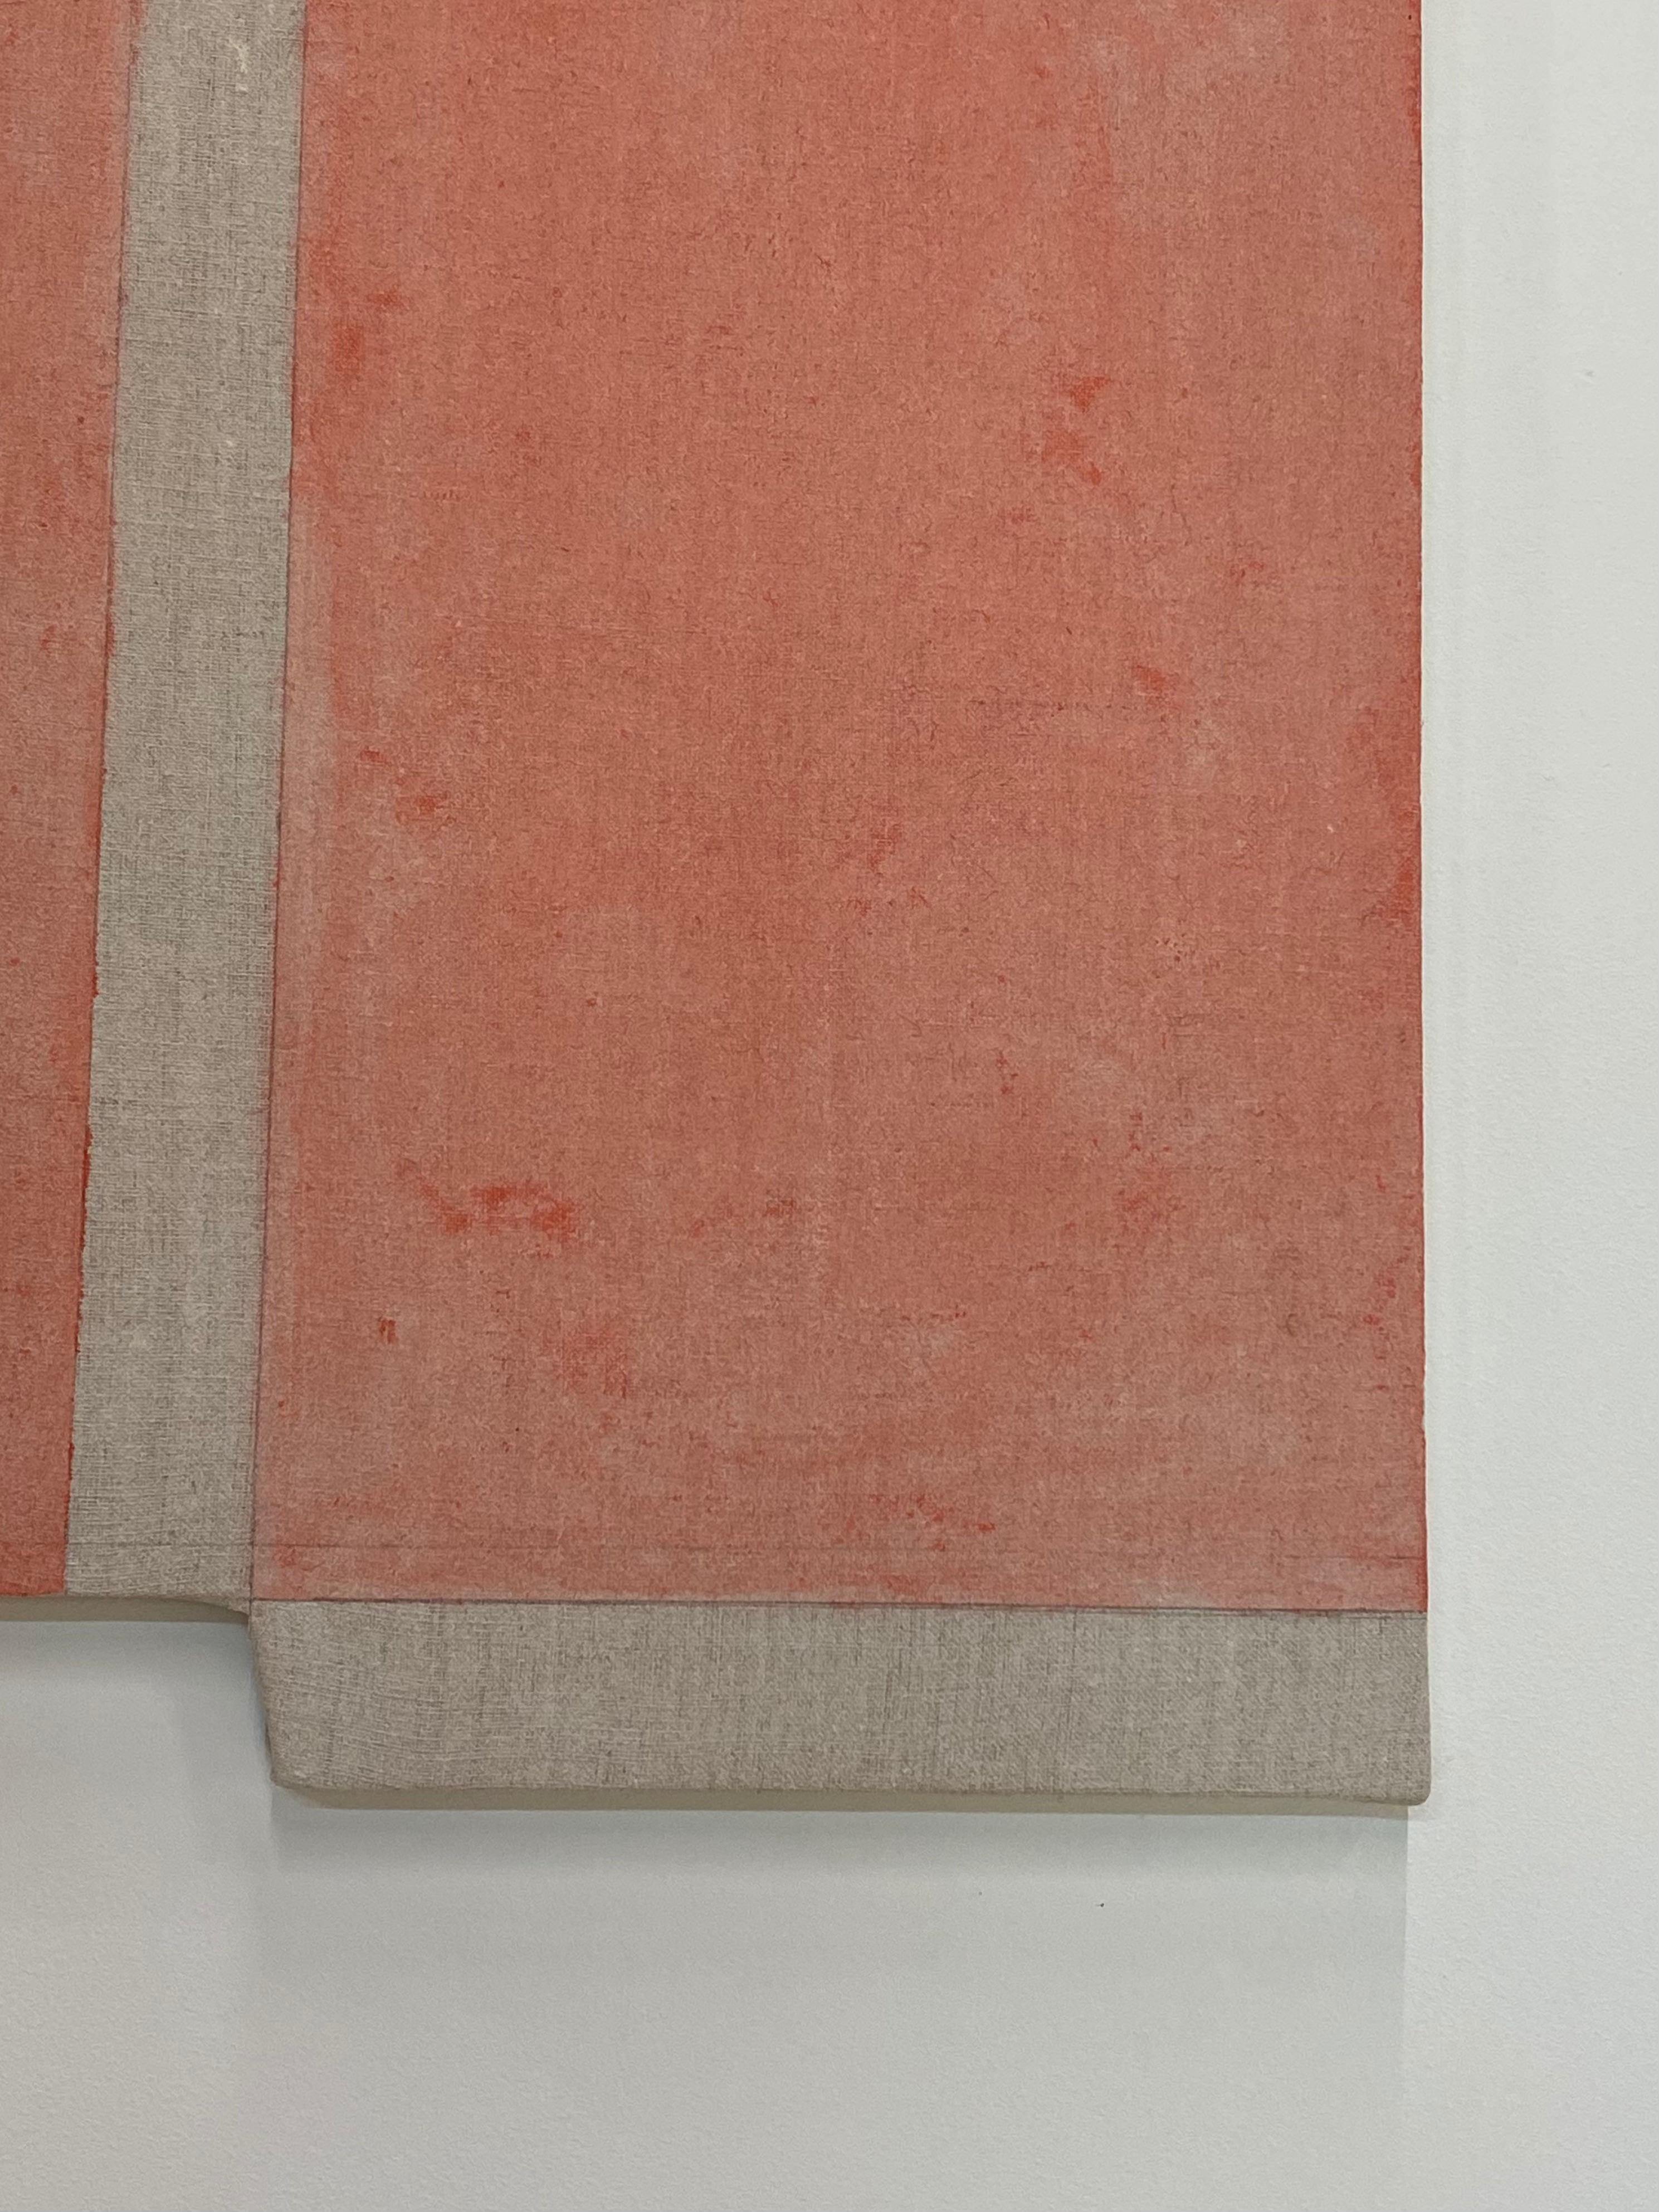 Cinnabar, Geometric Abstract, Coral Orange and Beige, Shaped Panel For Sale 3